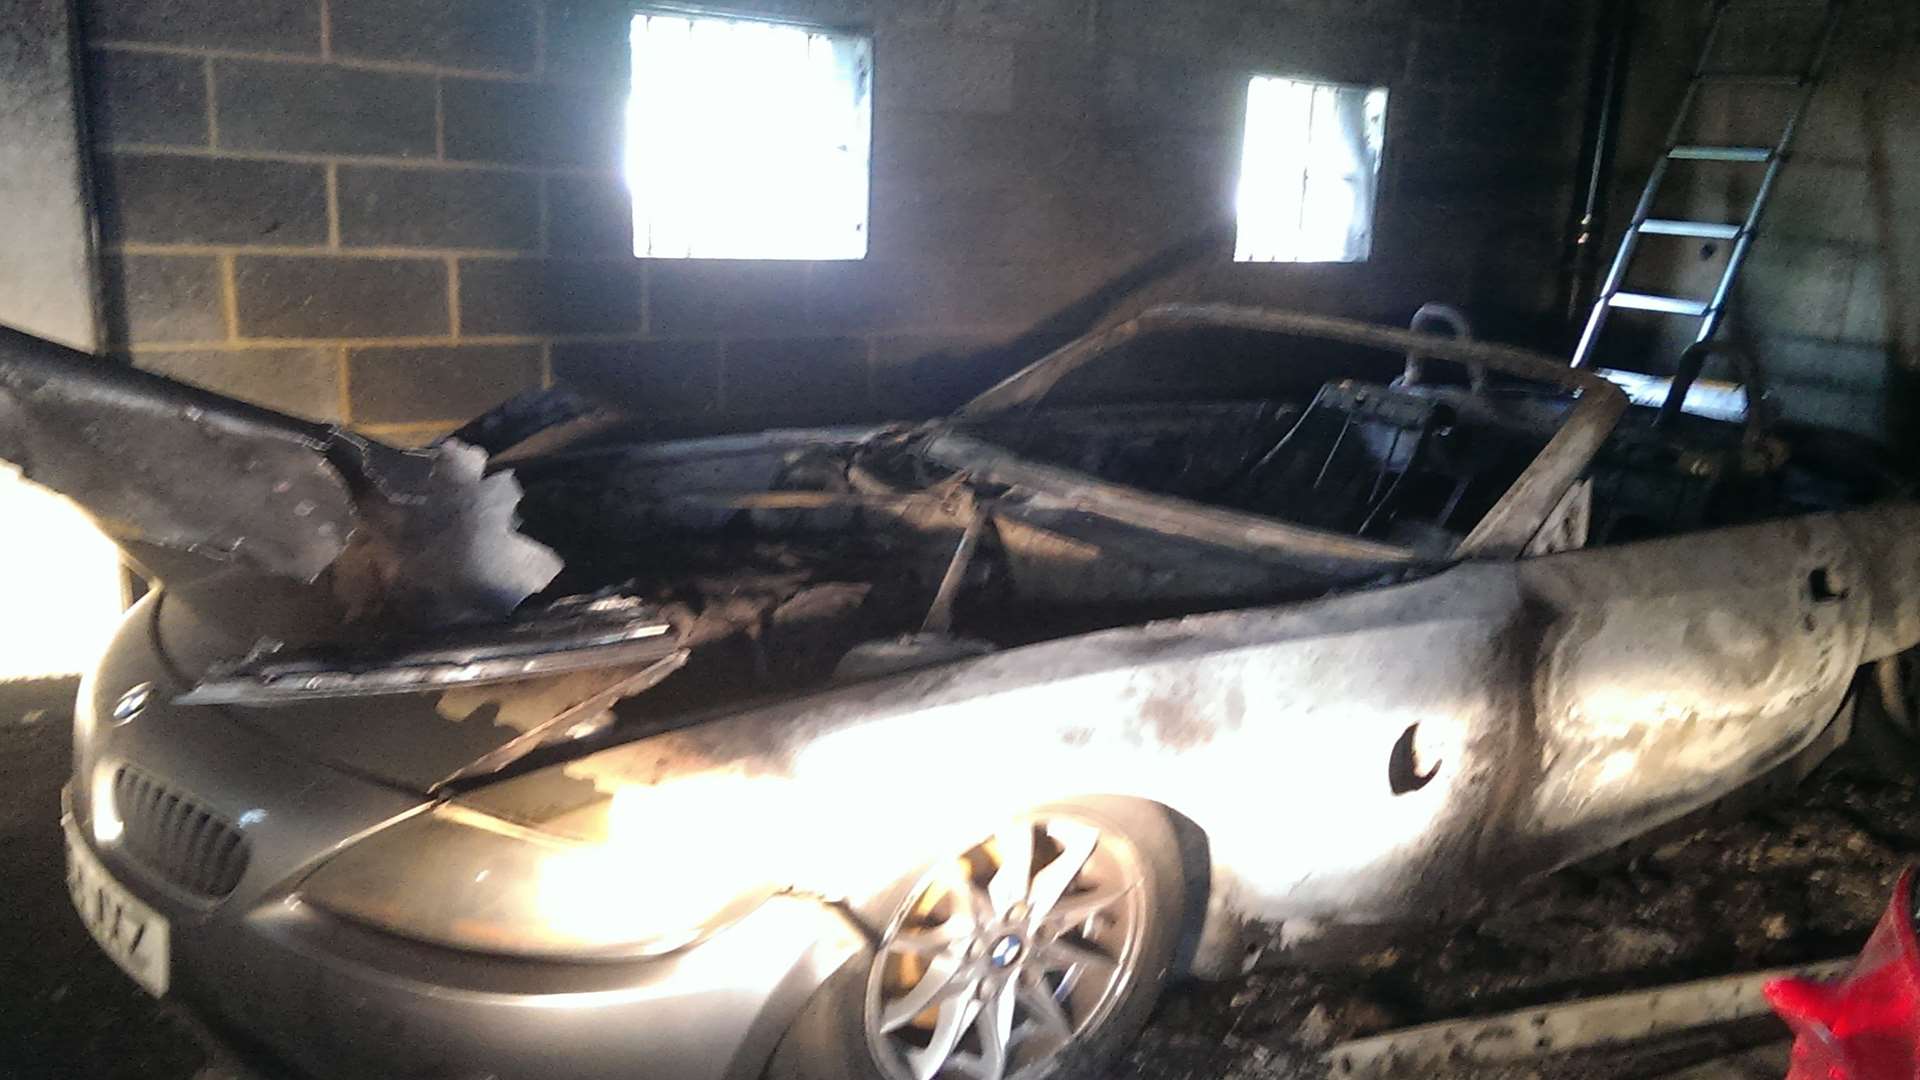 A burnt-out car caused by blaze at Tannery development